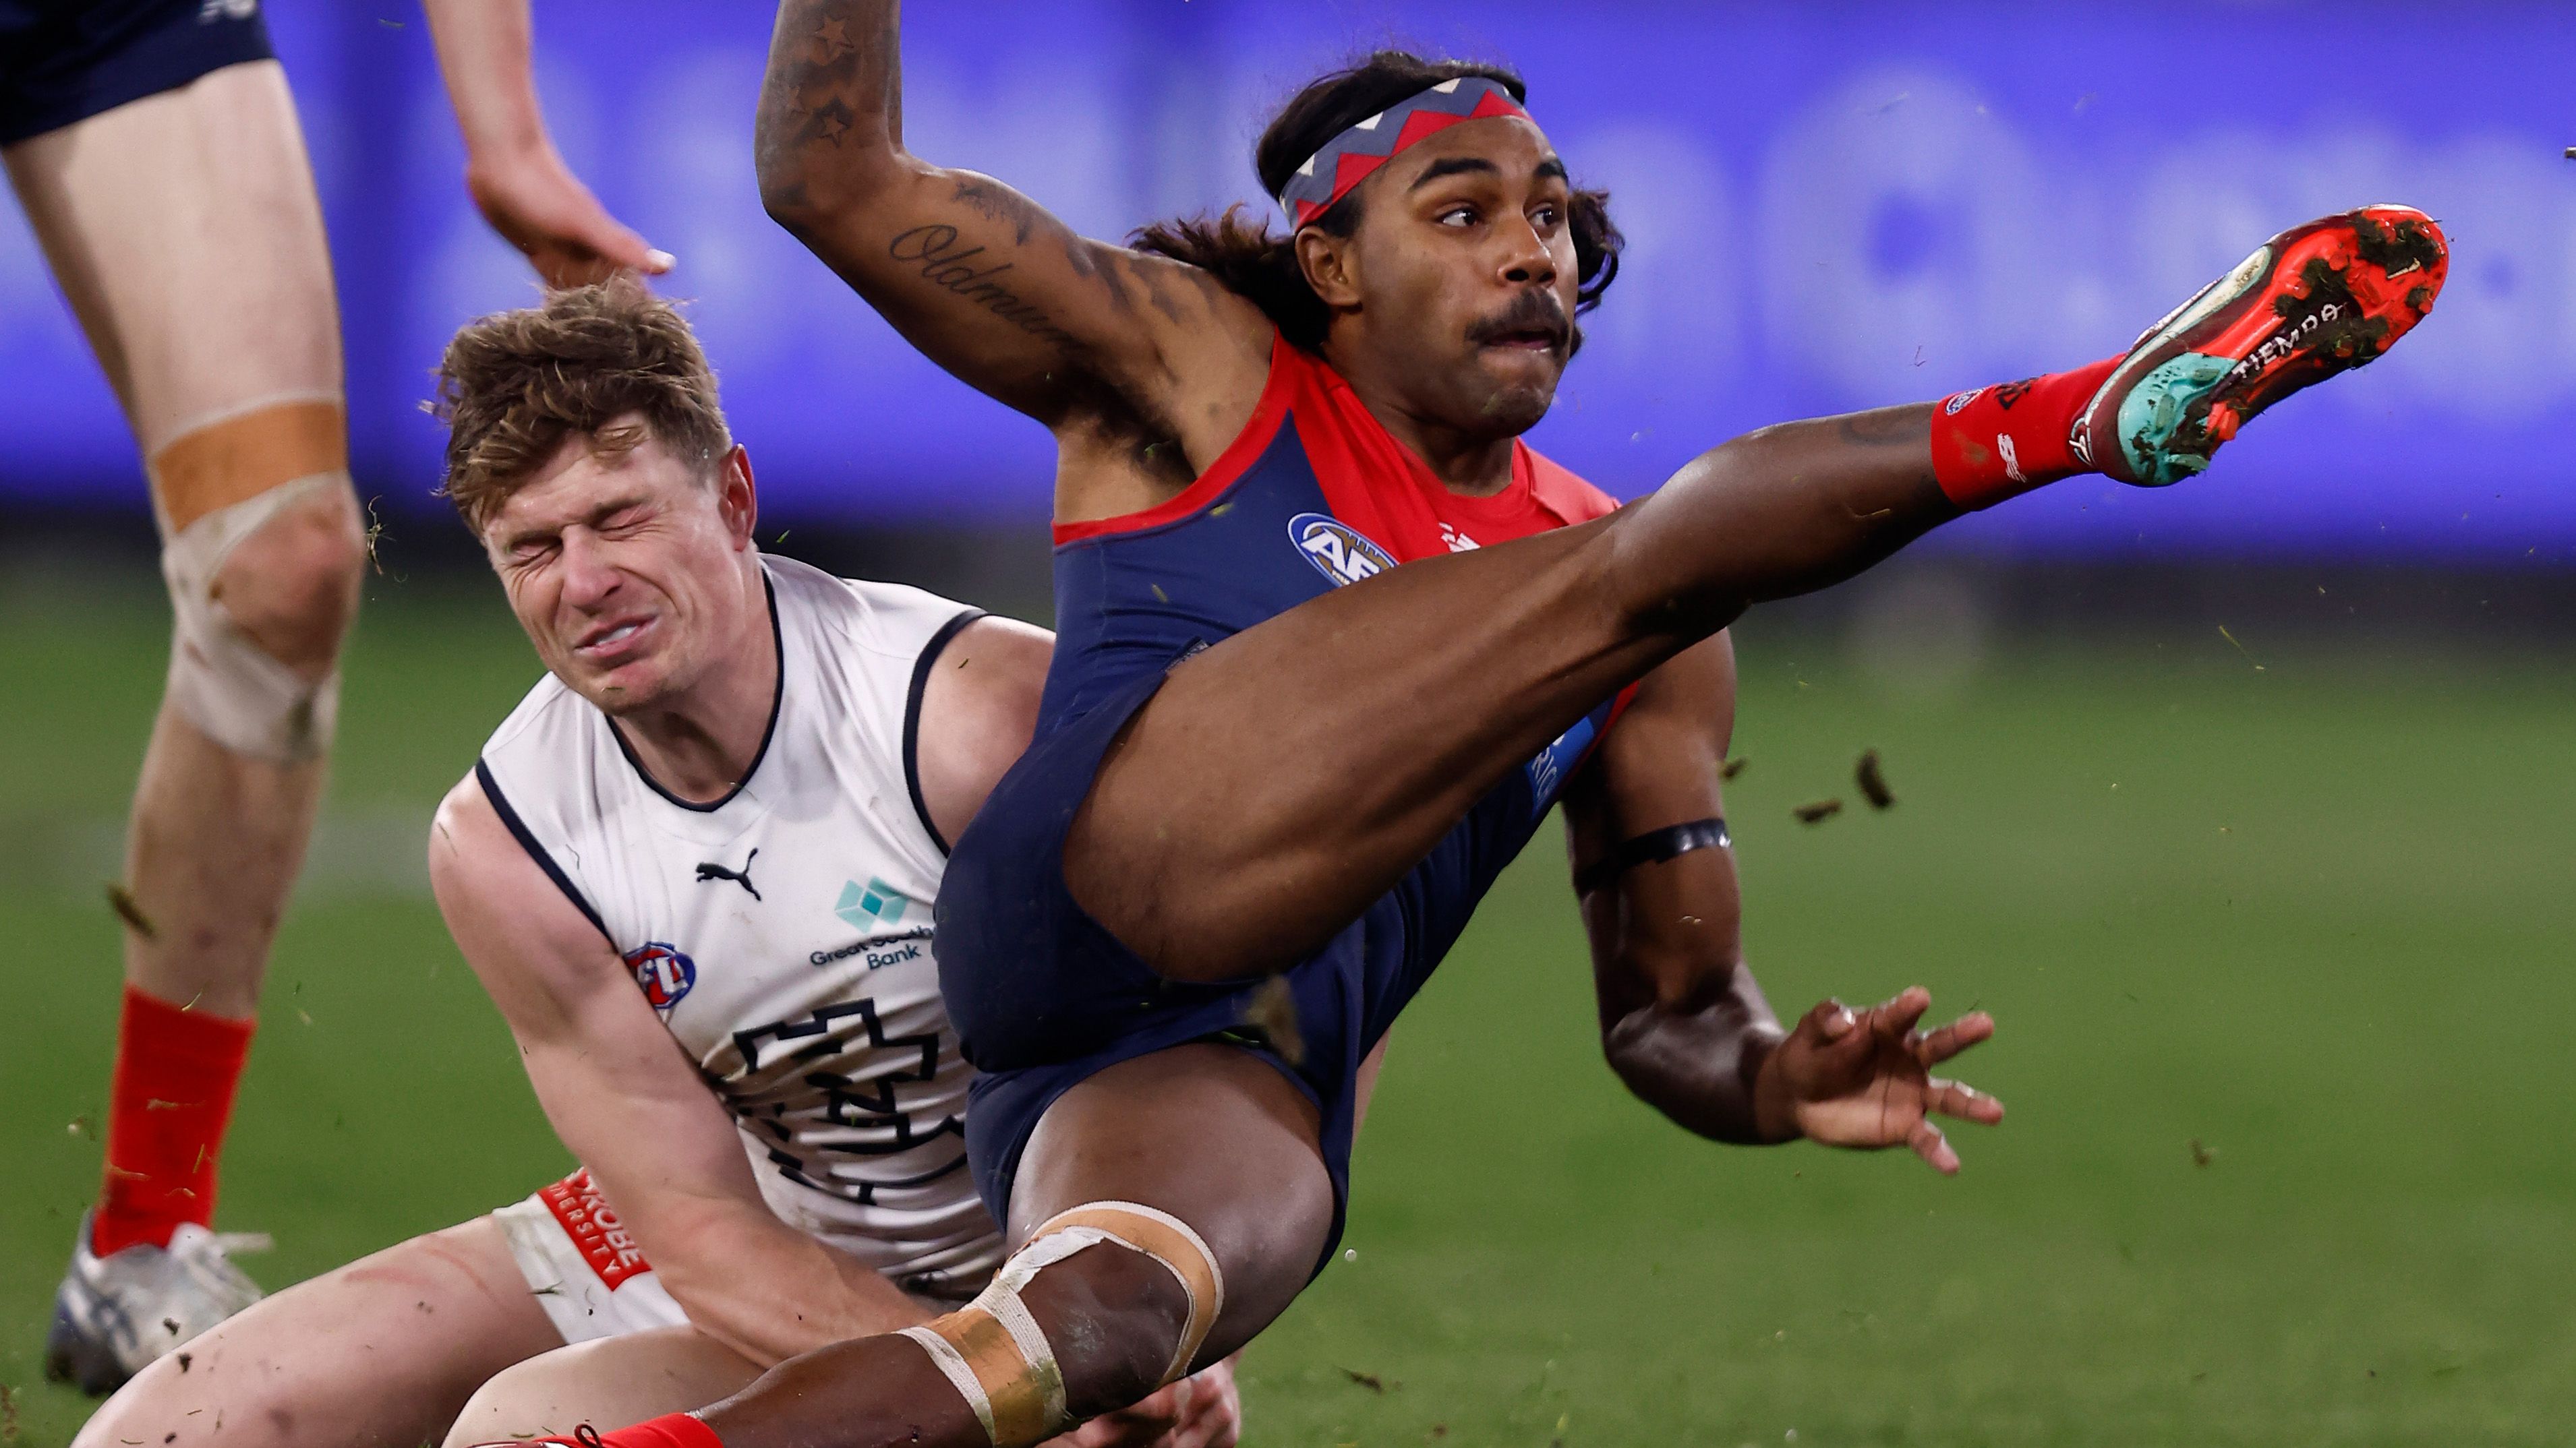 Kysaiah Pickett of the Demons kicks a goal to win the game during the round 22 AFL match between the Melbourne Demons and the Carlton Blues at Melbourne Cricket Ground on August 13, 2022 in Melbourne, Australia. (Photo by Darrian Traynor/Getty Images)